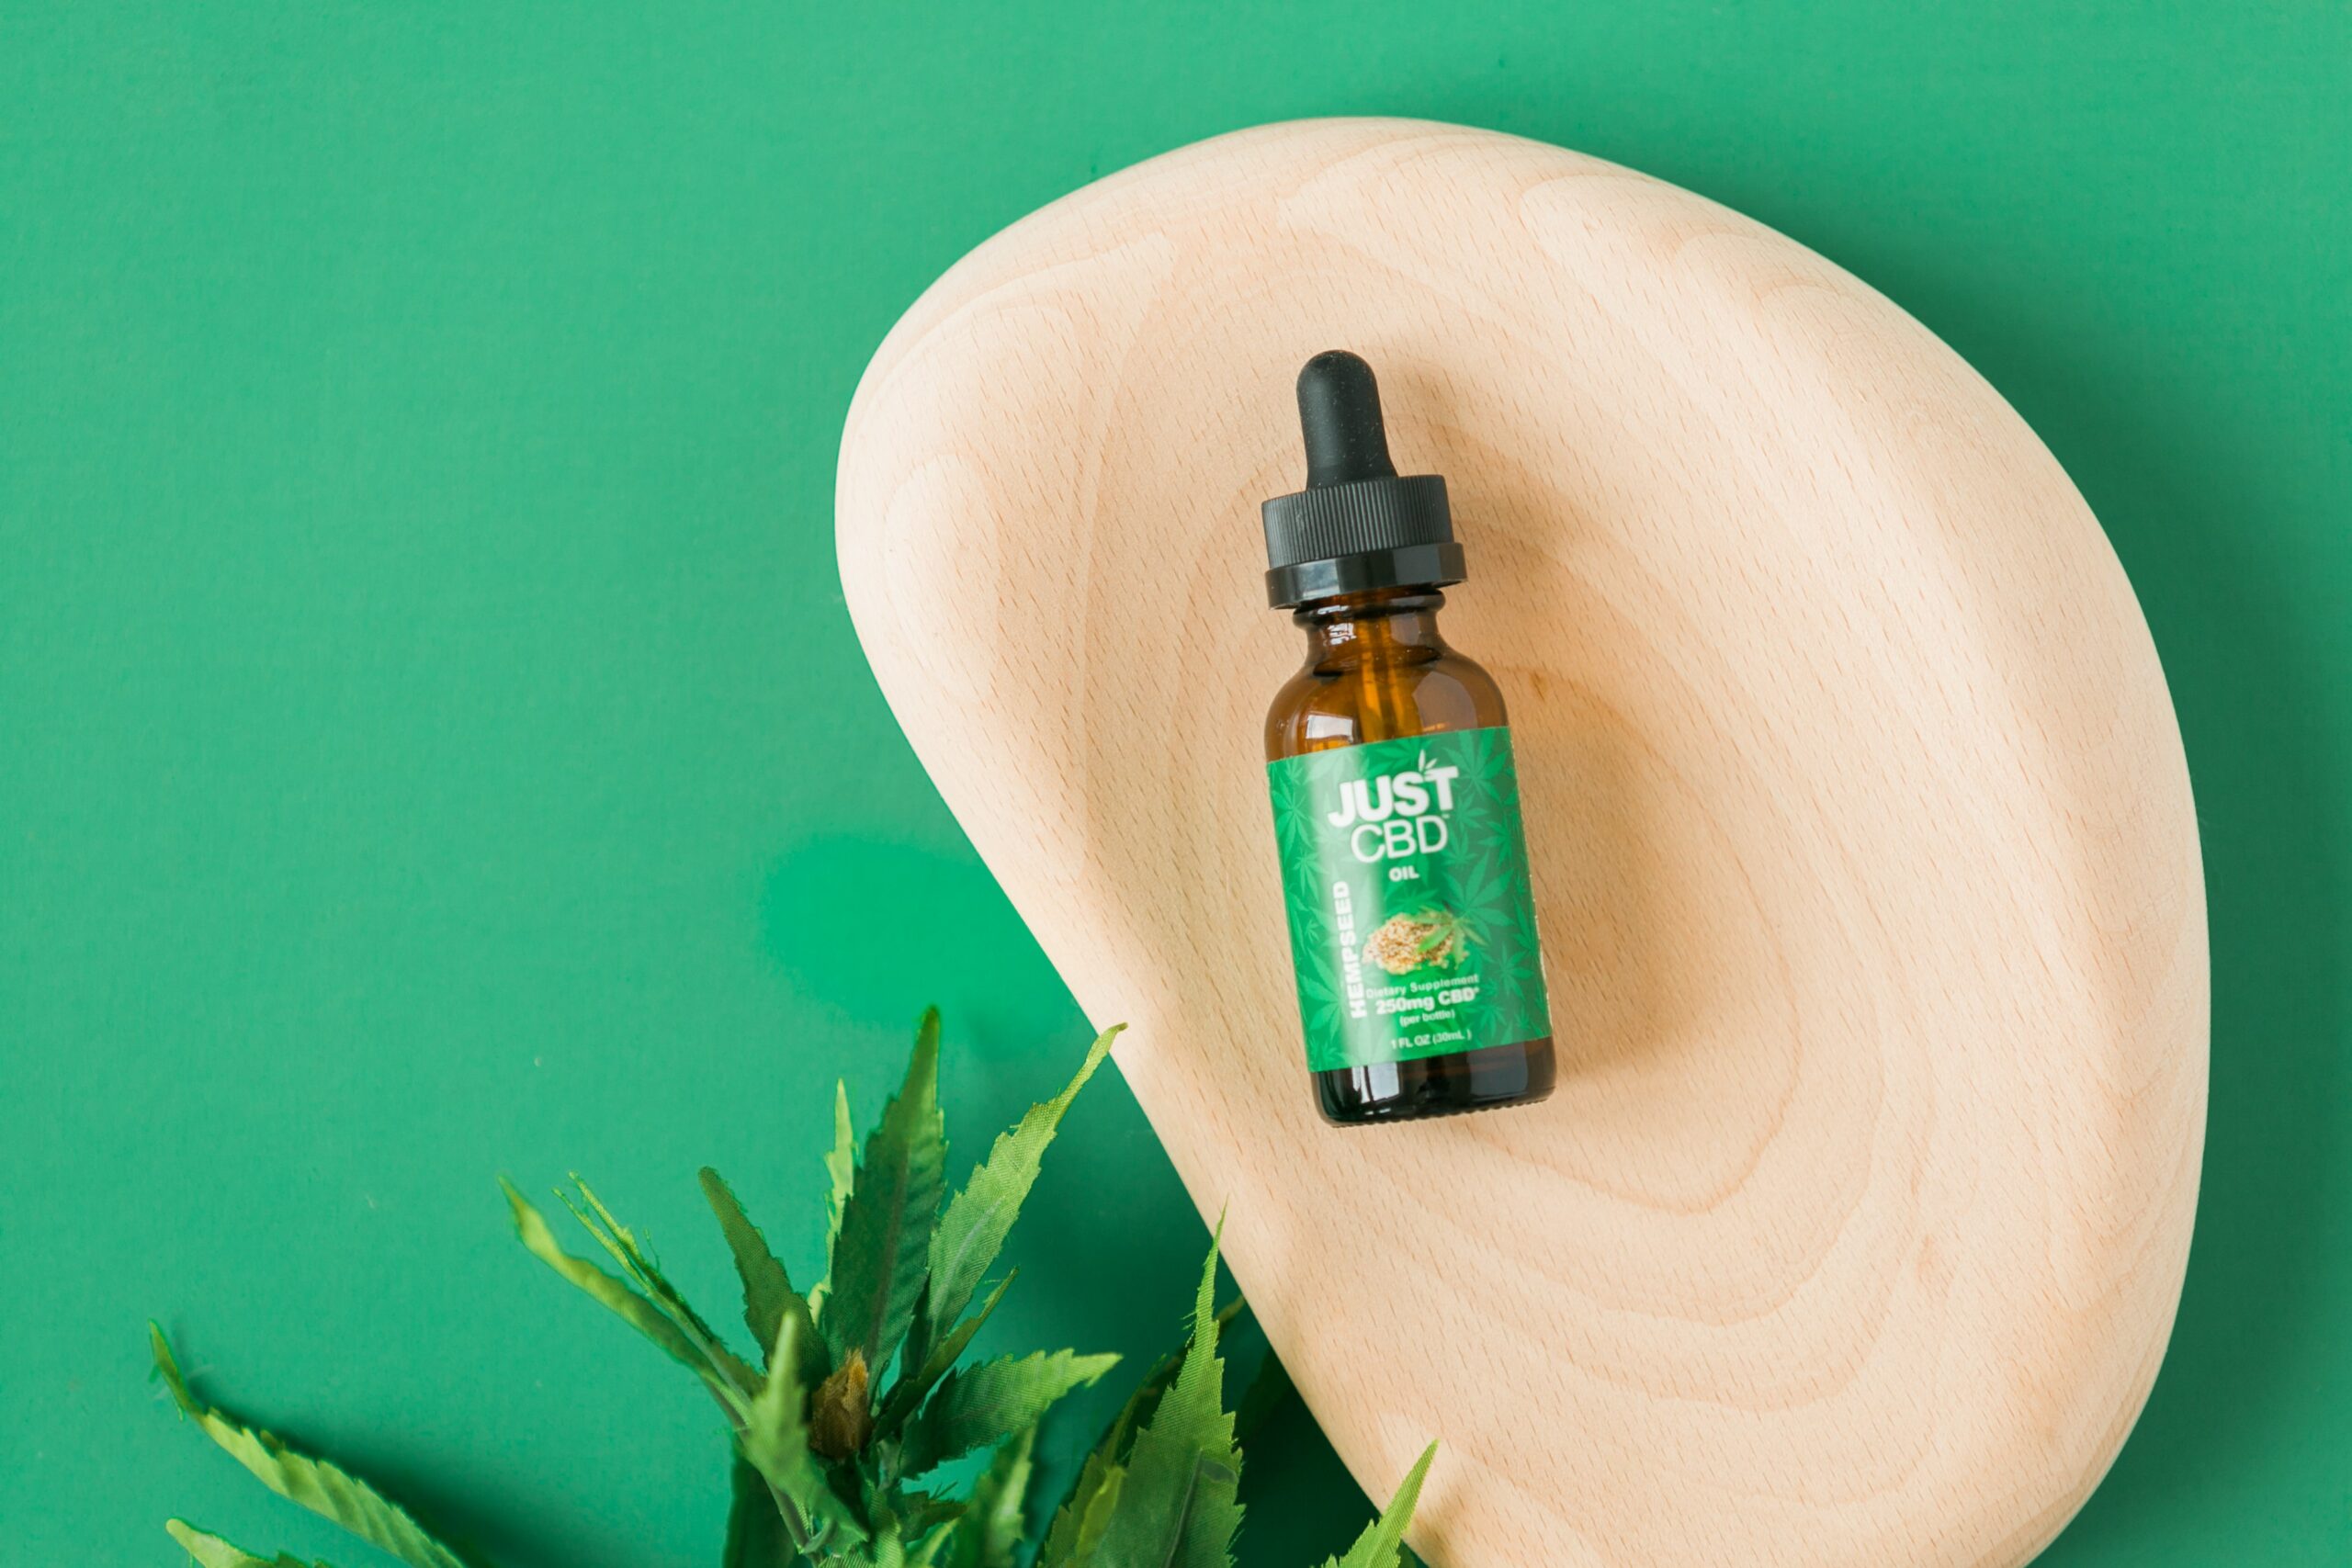 WHAT ARE THE BENEFITS OF HIGH POTENCY CBD OIL?